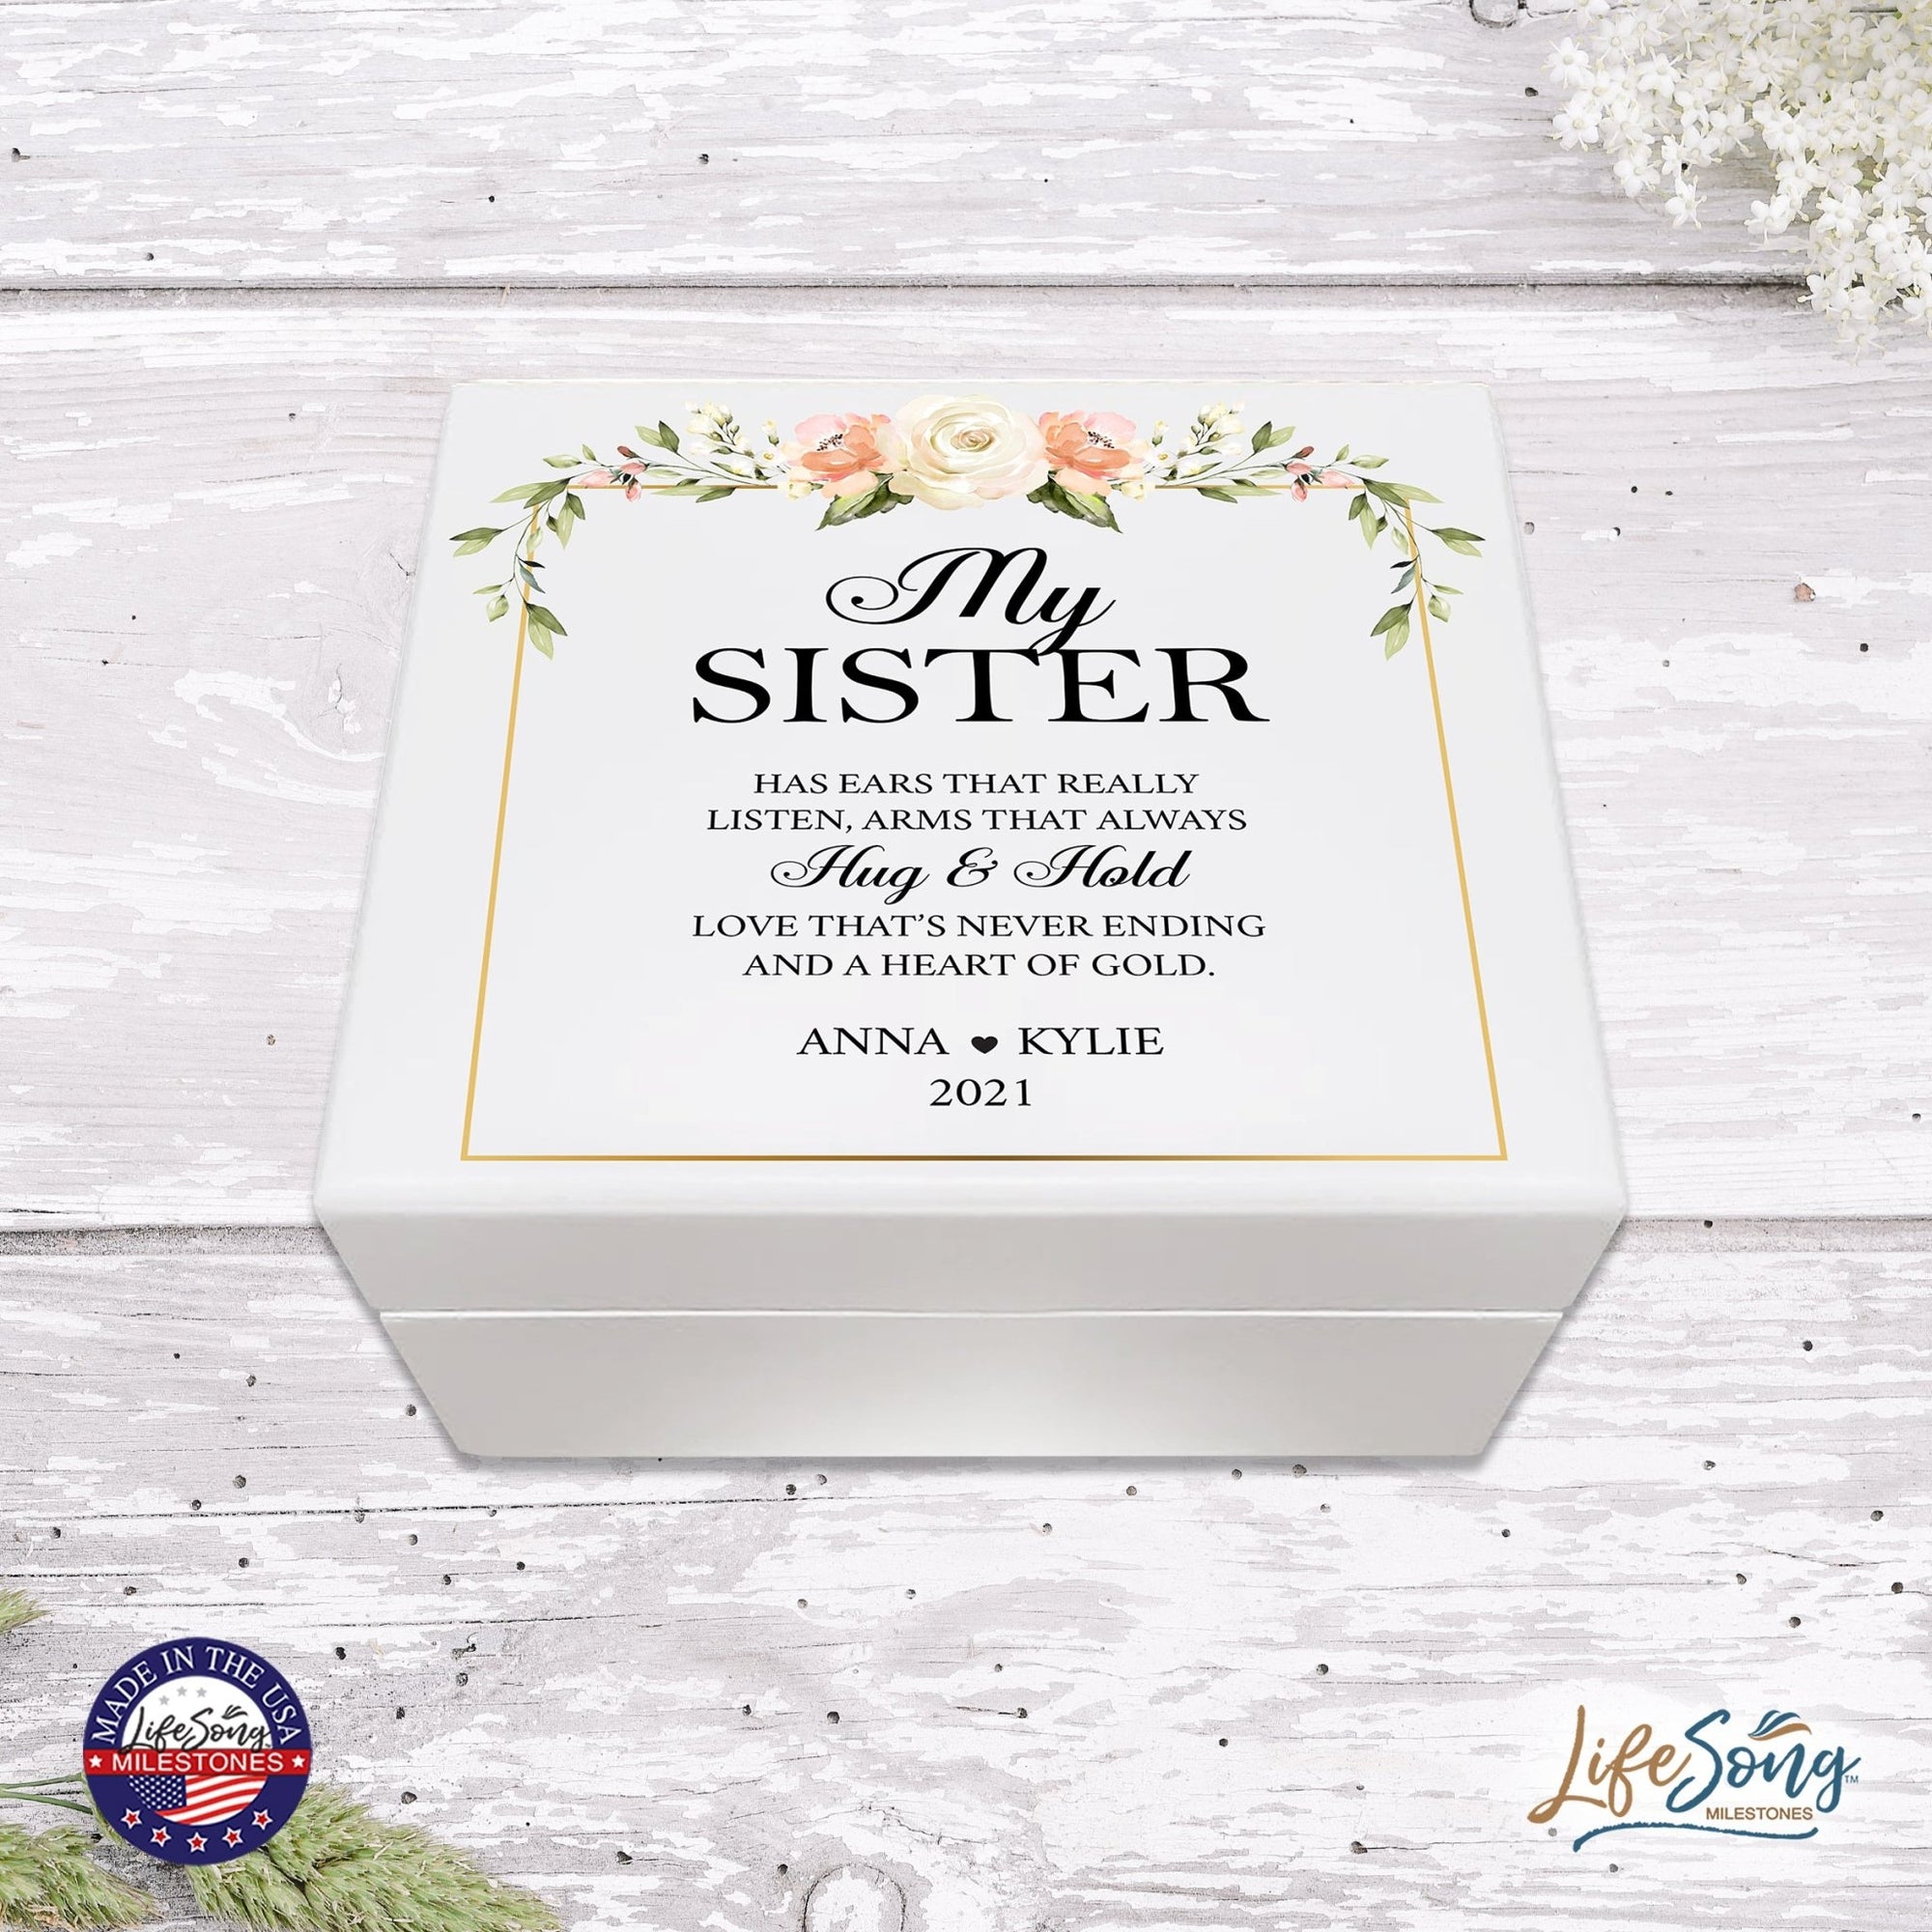 Personalized Memorable Sister’s White Keepsake Box 6x5.5 with inspiring verse - Hug and Hold - LifeSong Milestones